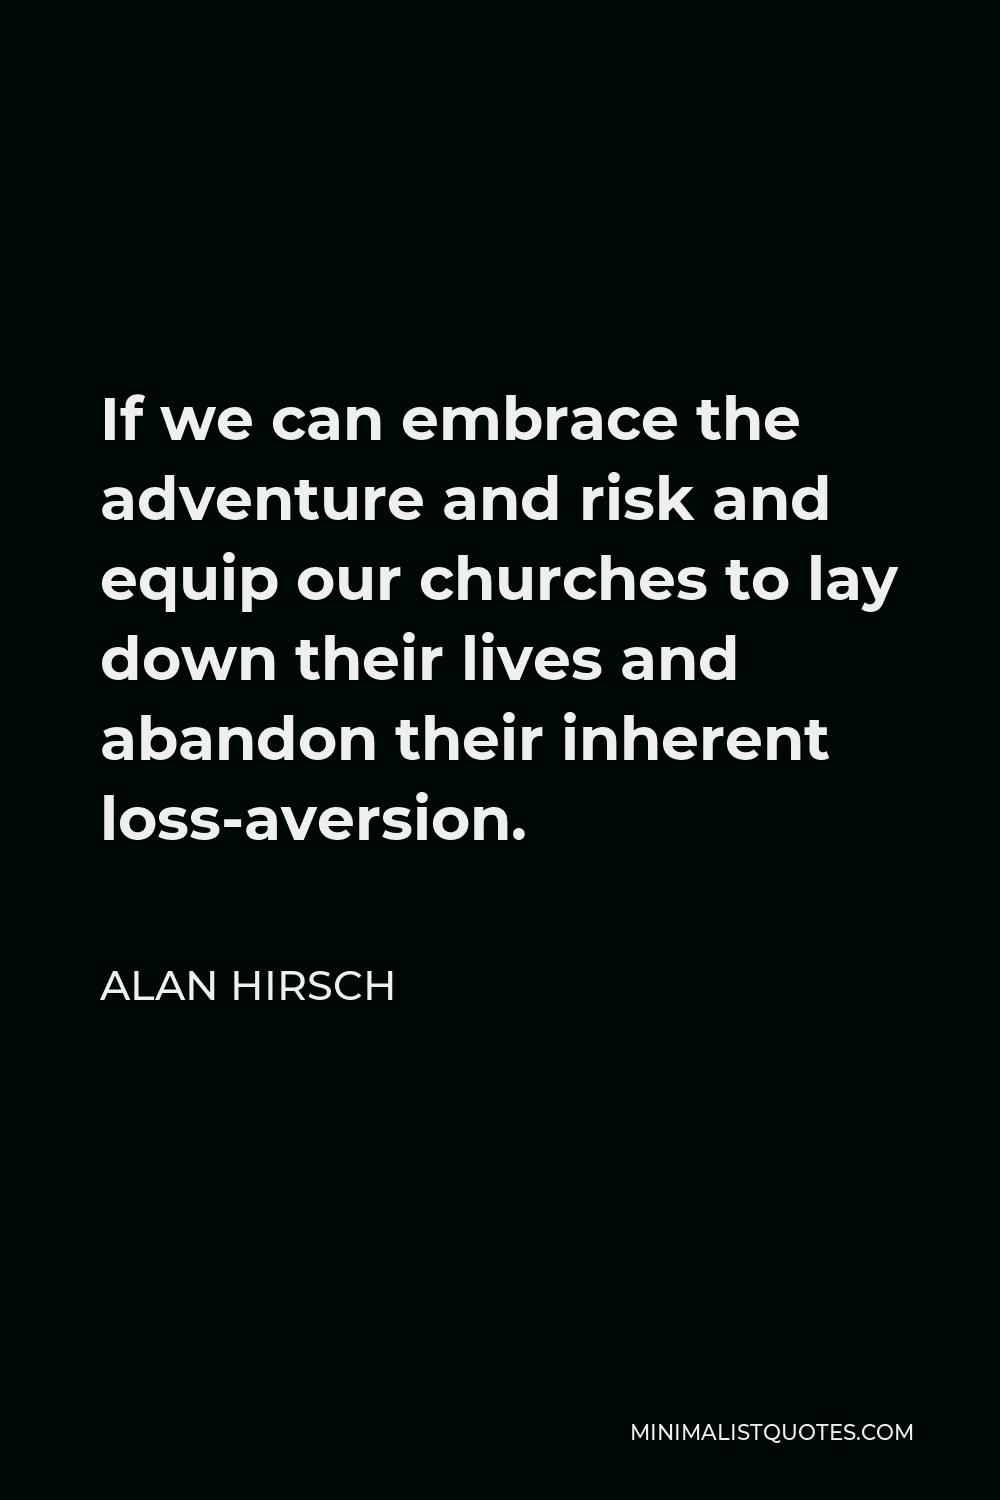 Alan Hirsch Quote - If we can embrace the adventure and risk and equip our churches to lay down their lives and abandon their inherent loss-aversion.